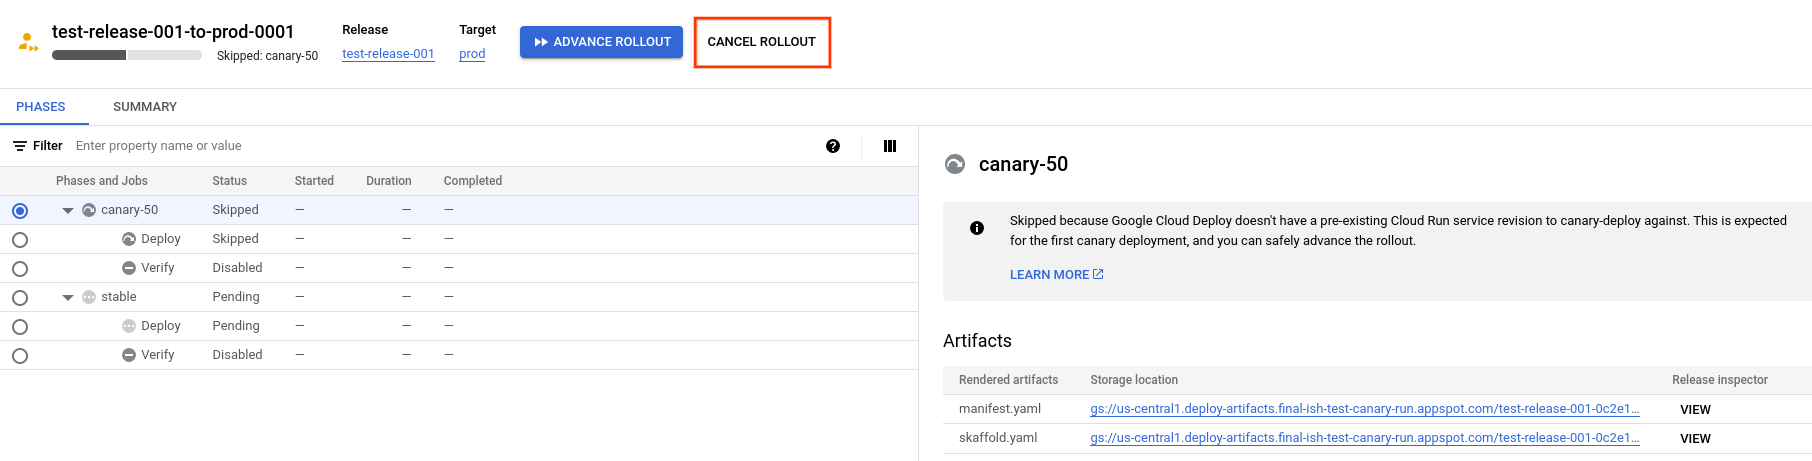 Roll-out-Details in der Google Cloud Console 